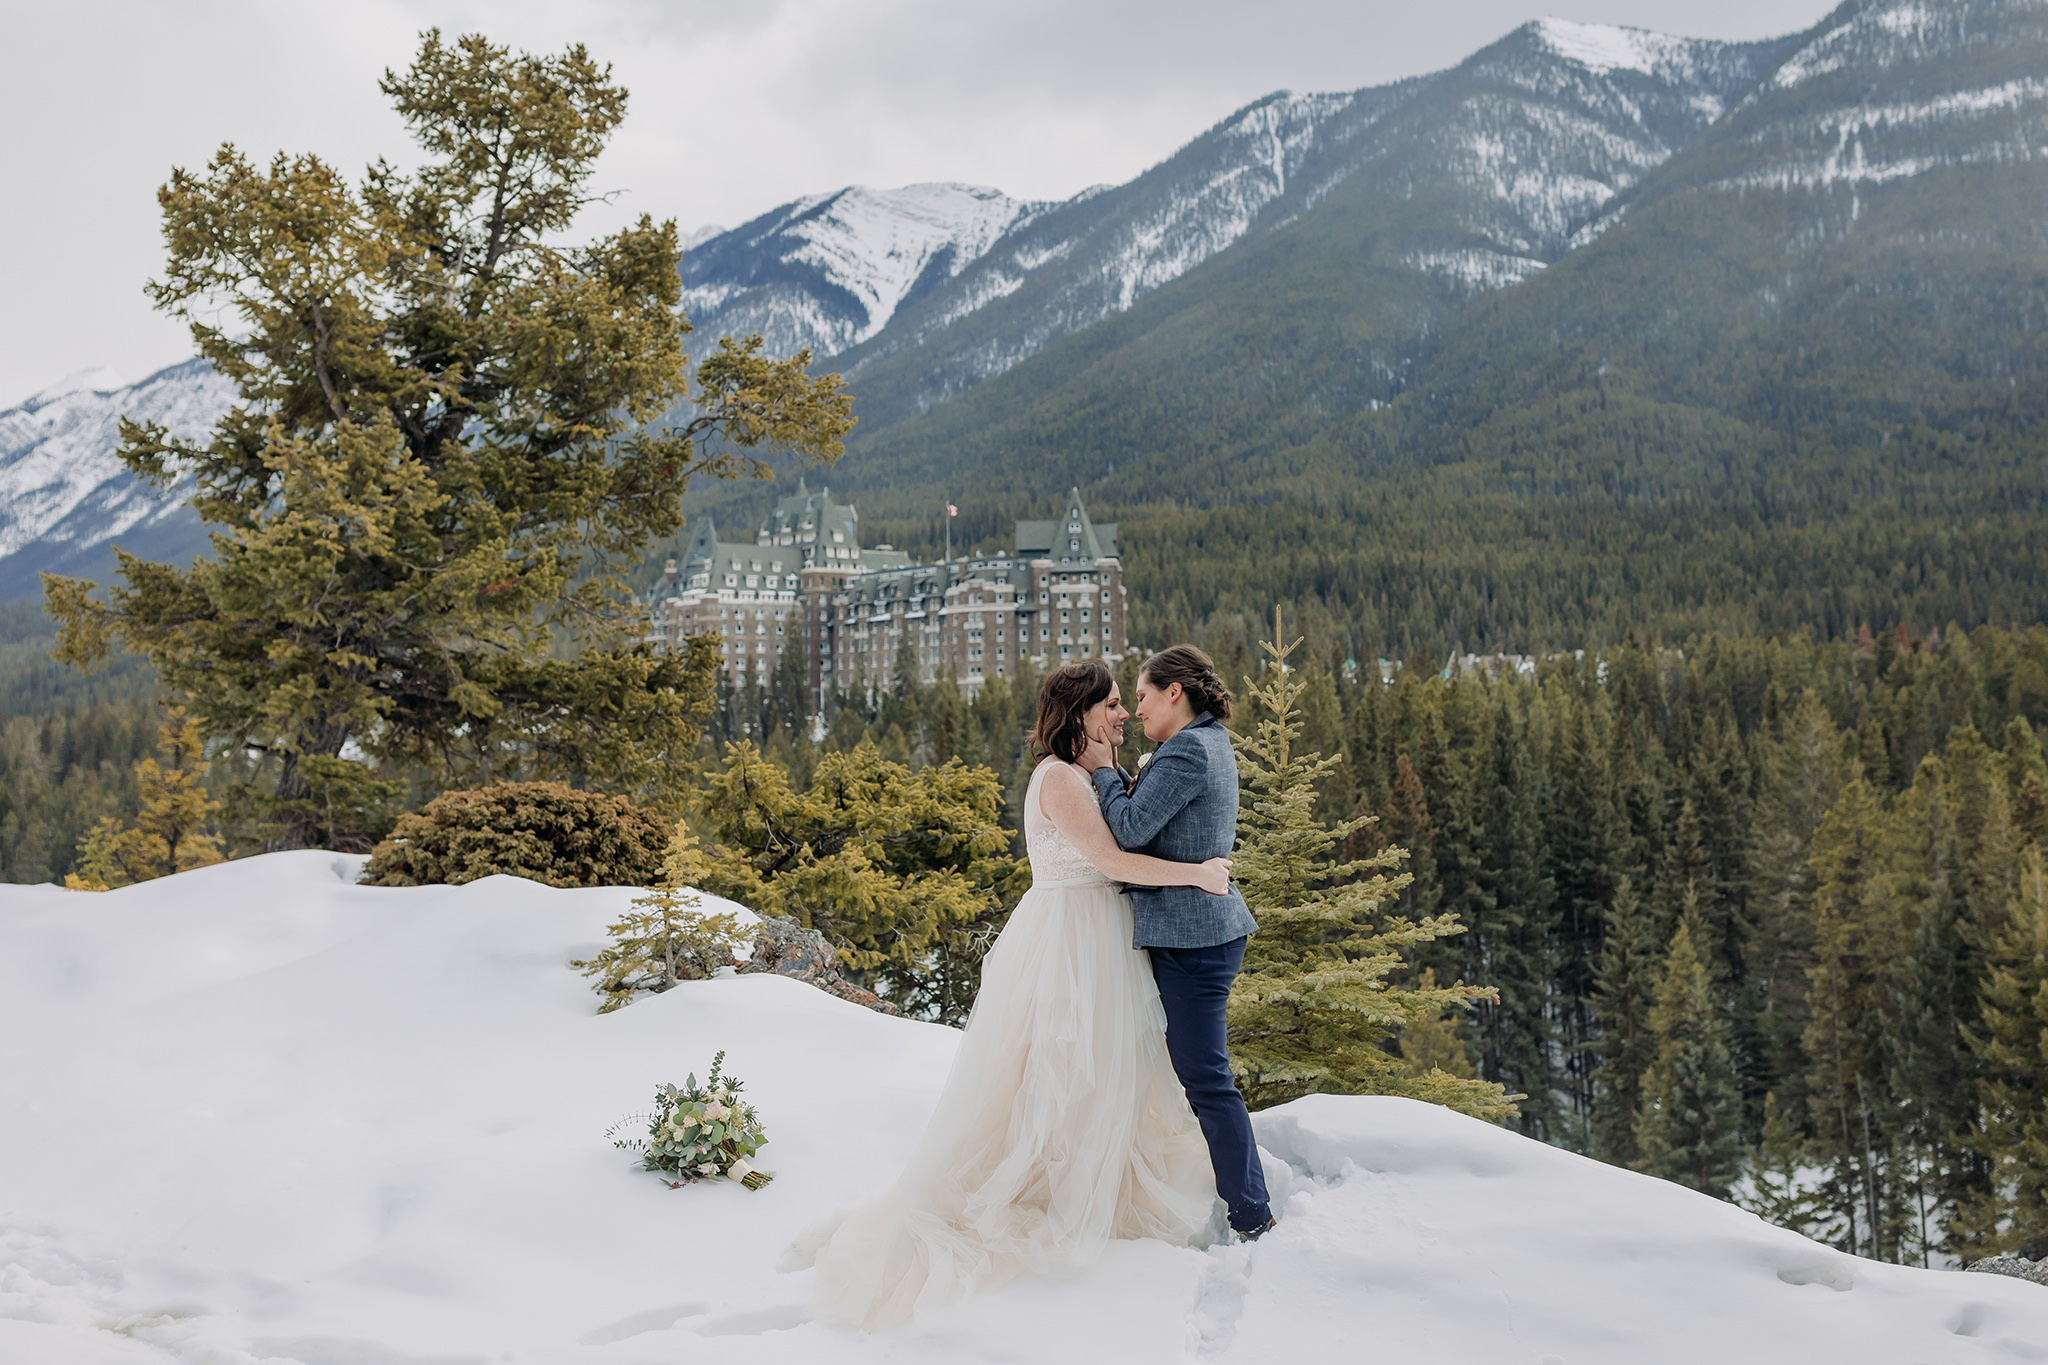 LGBTQ gay elopement in the mountains in winter surprise corner